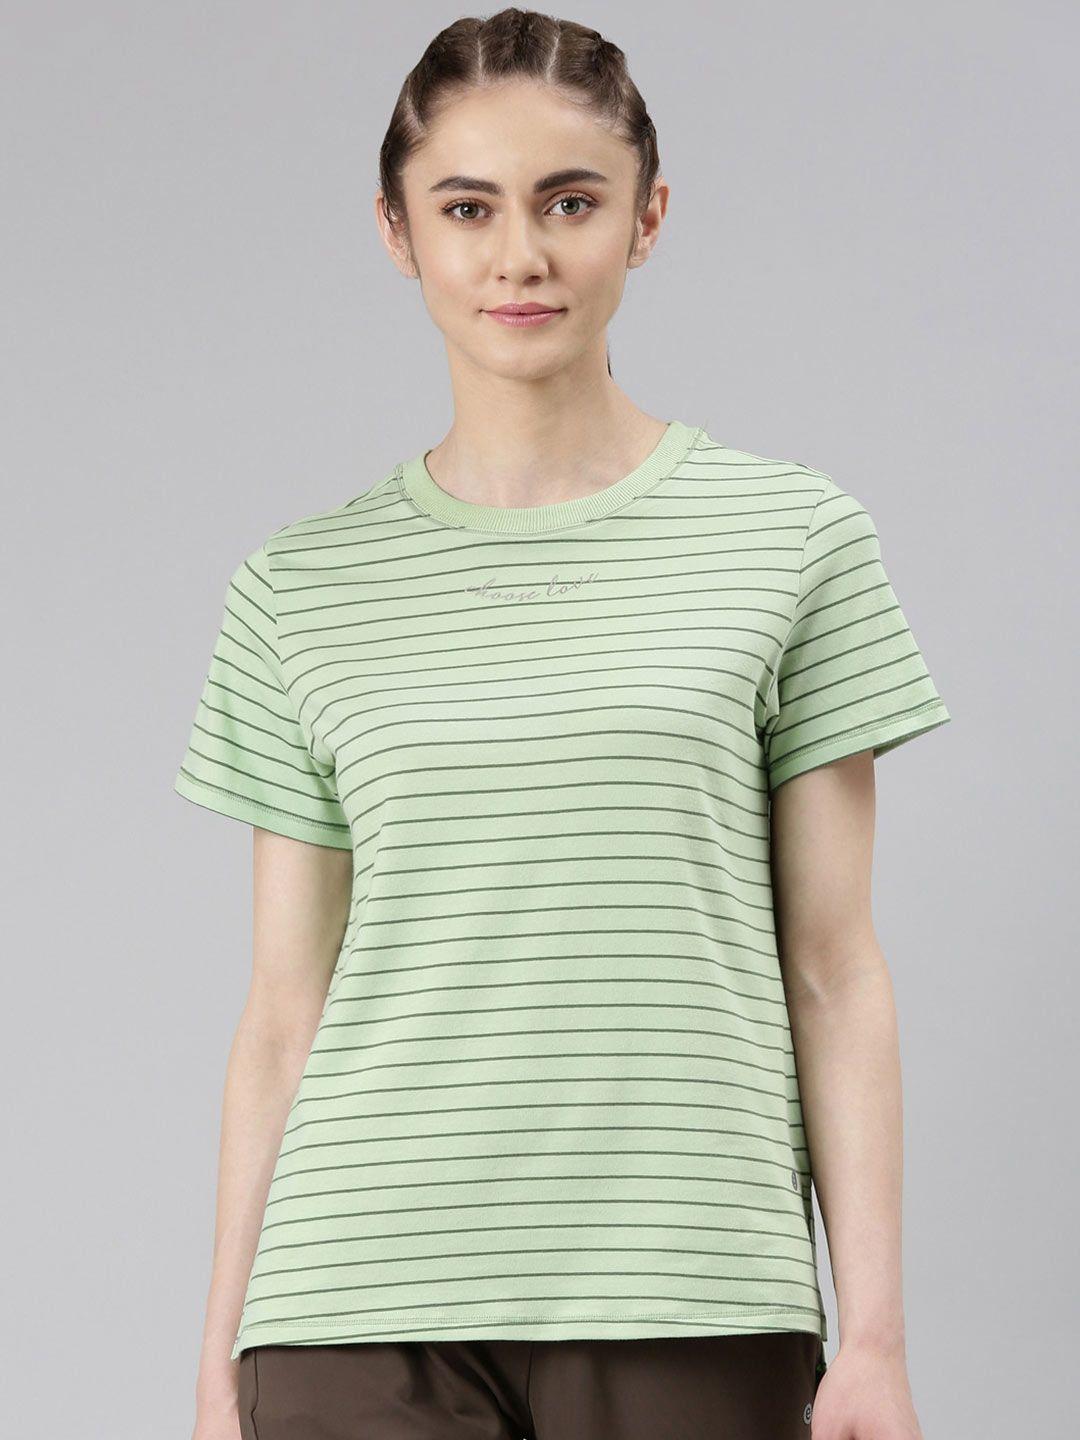 enamor striped antimicrobial active cotton t-shirt